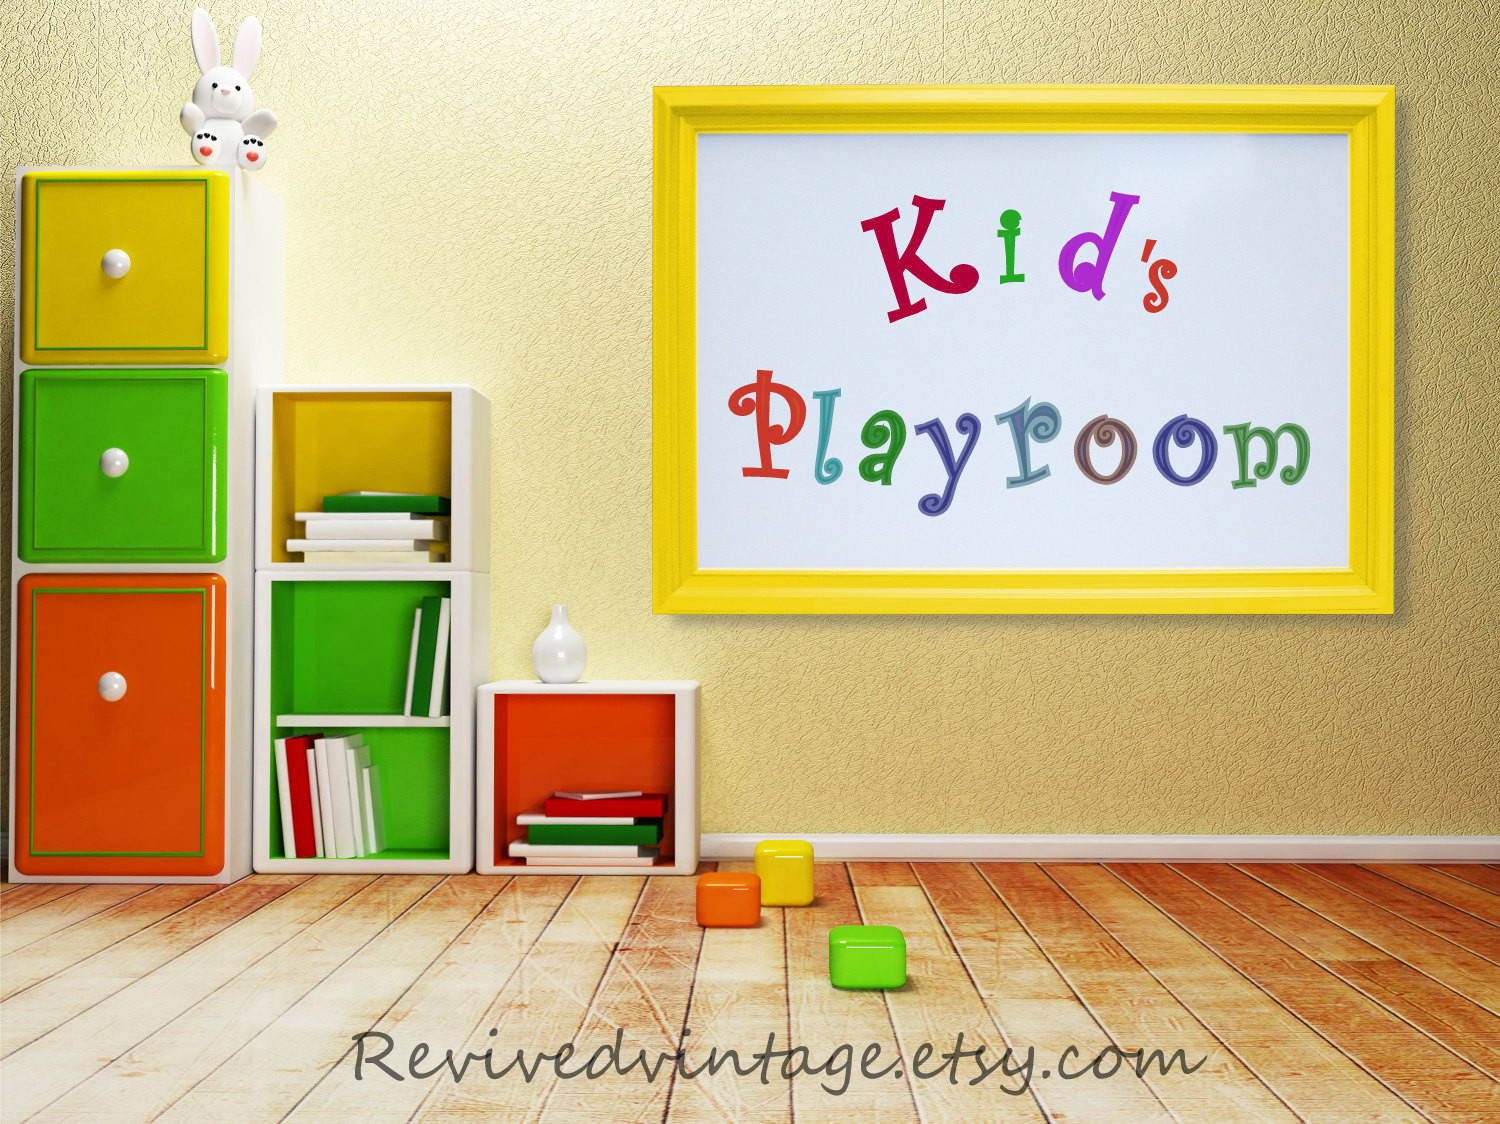 Magnetic Board For Kids Room
 KIDS PLAYROOM DECORATION Wall Art Decor Whiteboard